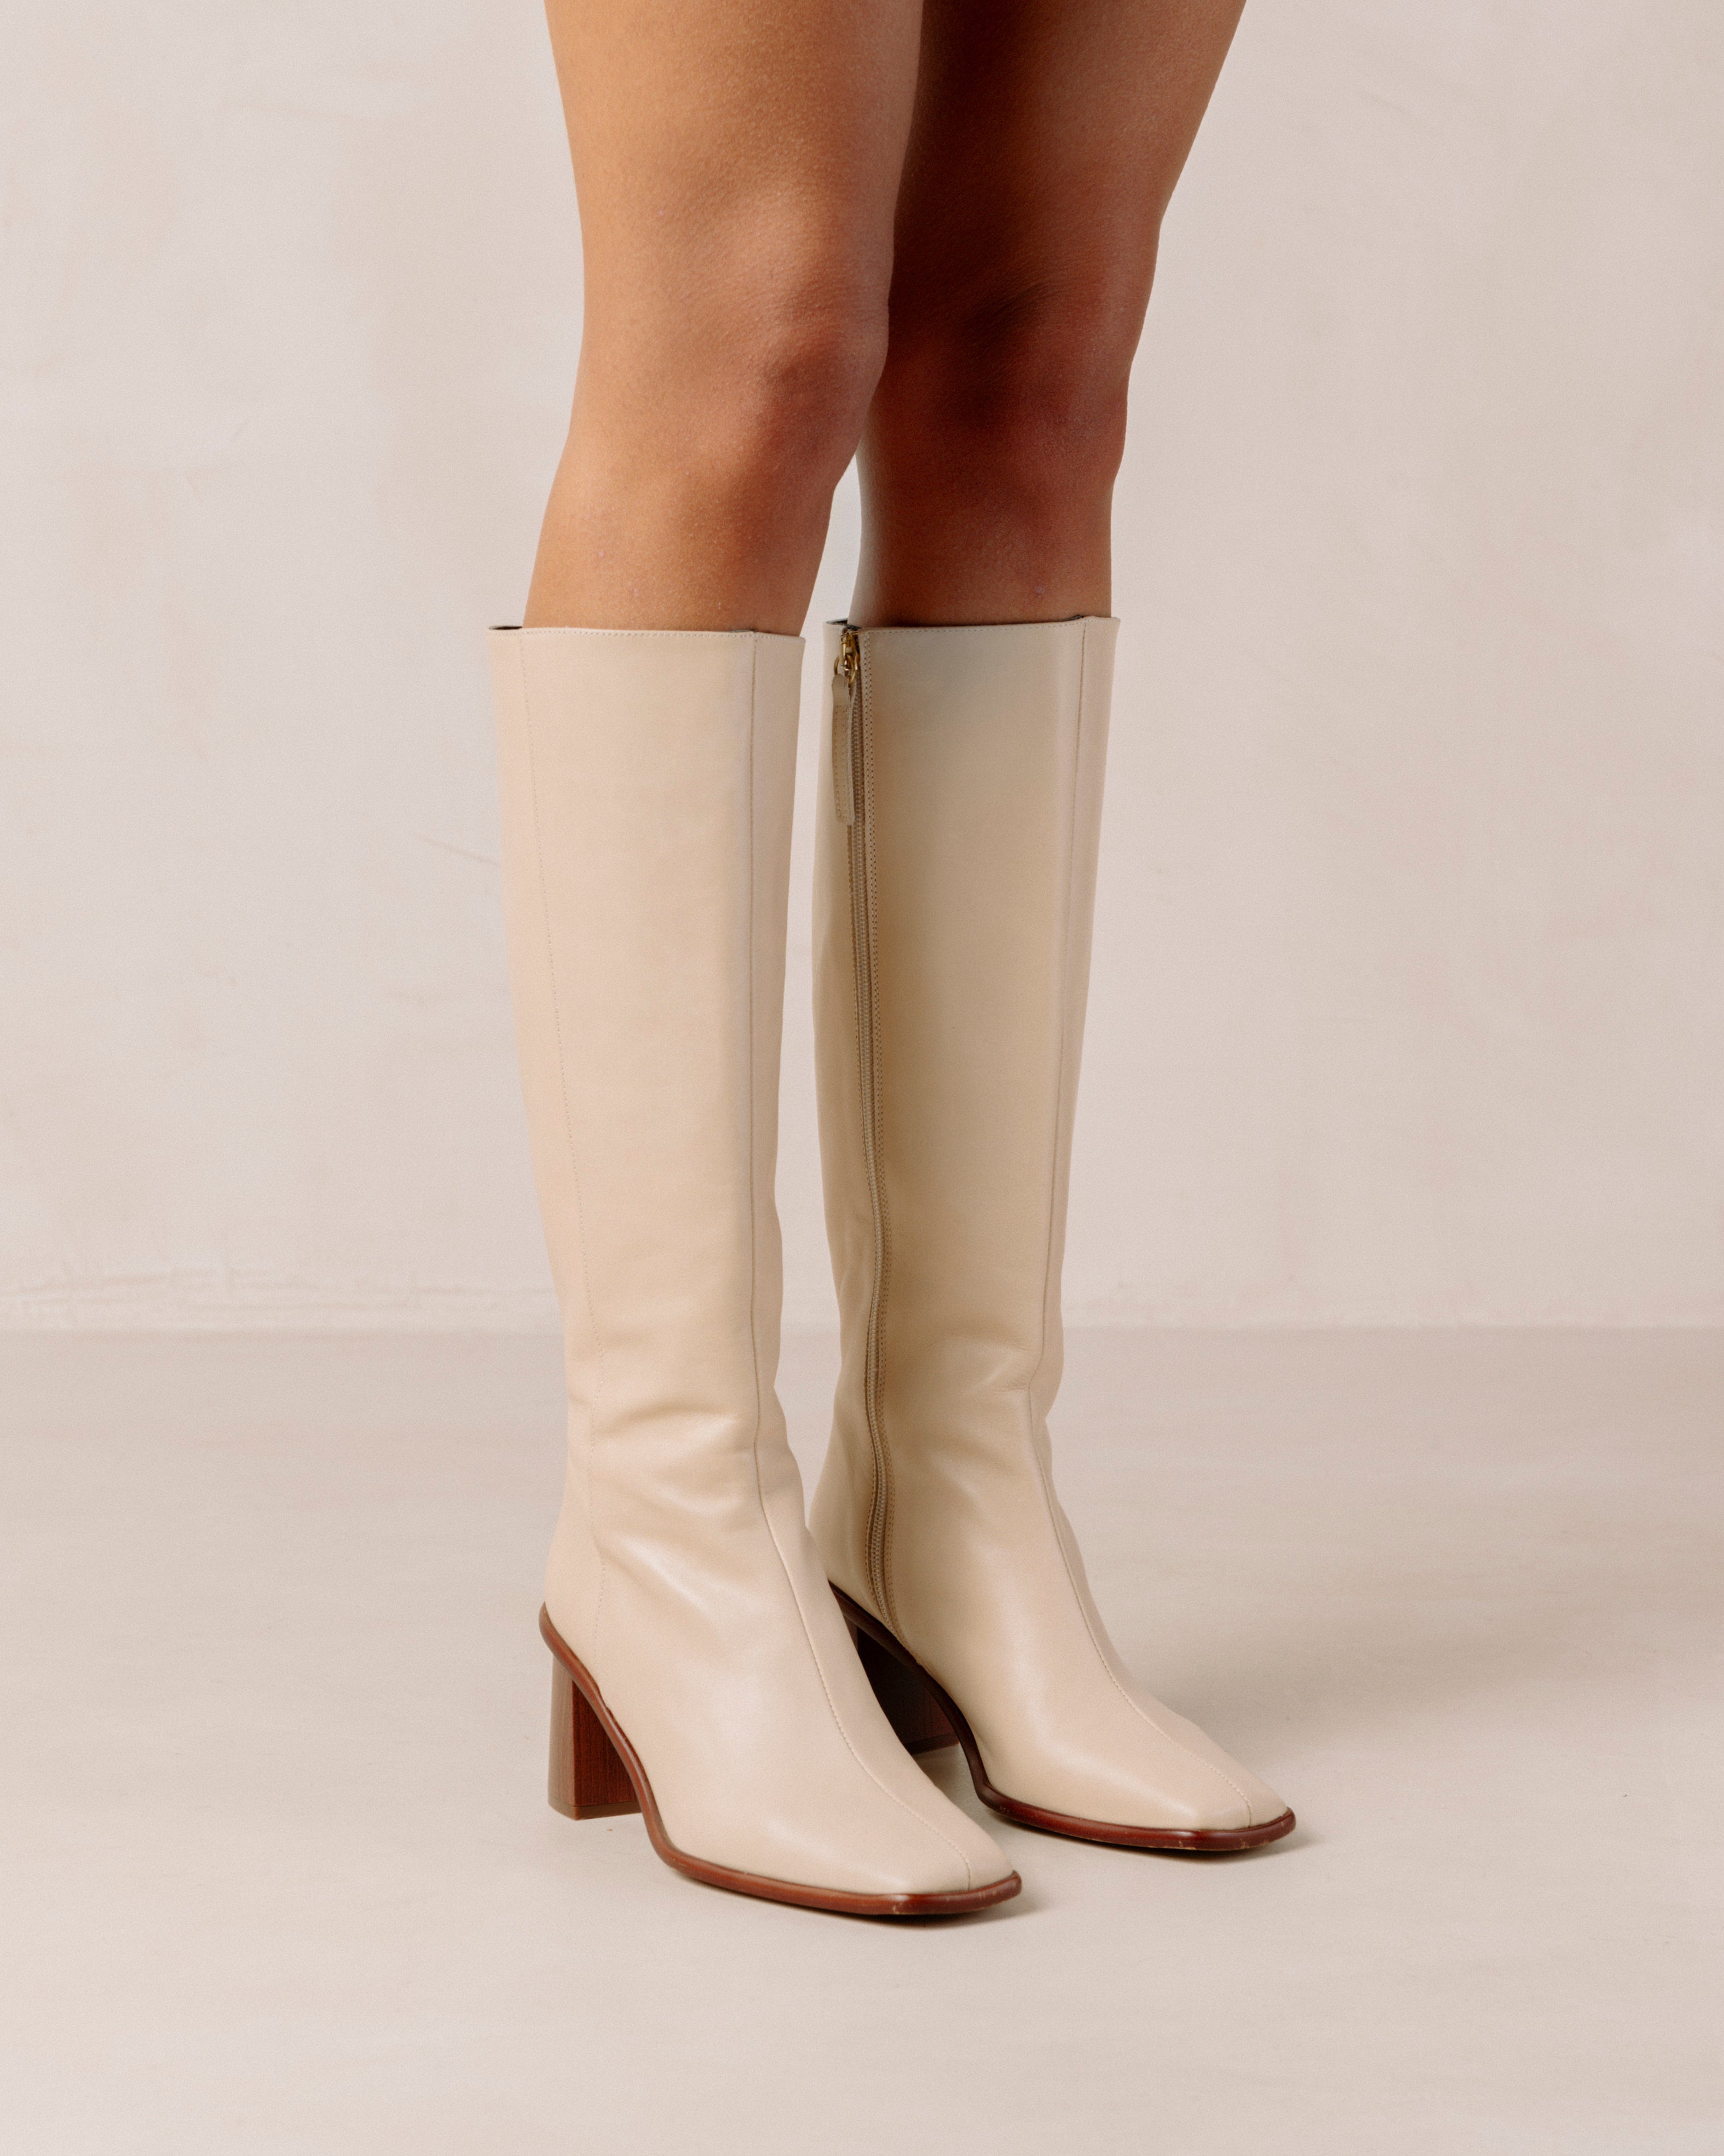 East Cream Leather Boots - Project Cece